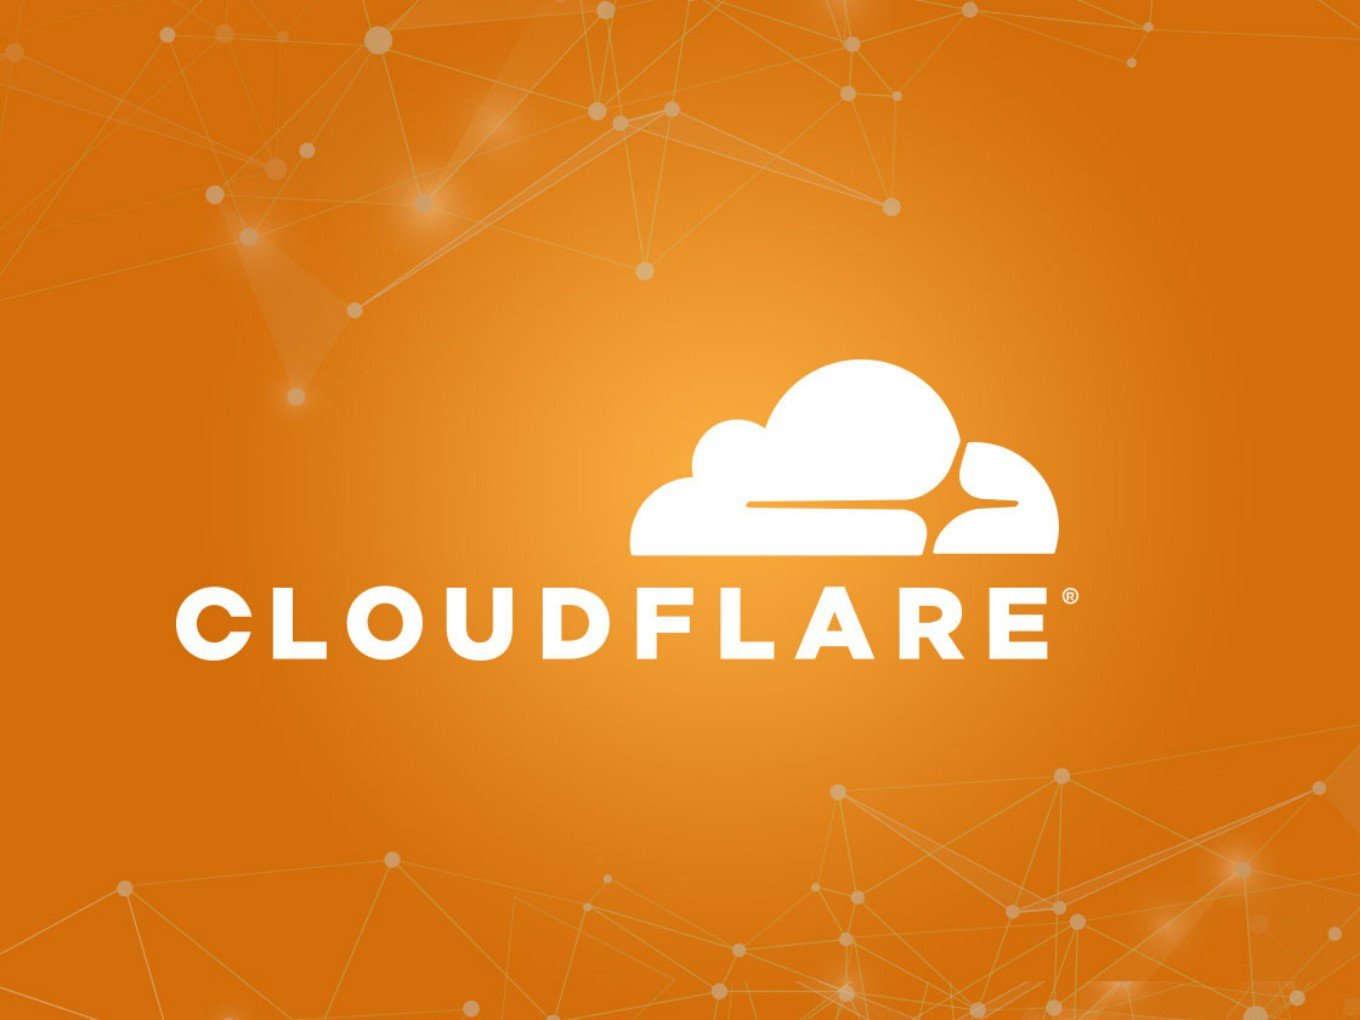 Web Performance And Security Company Cloudflare Files For IPO